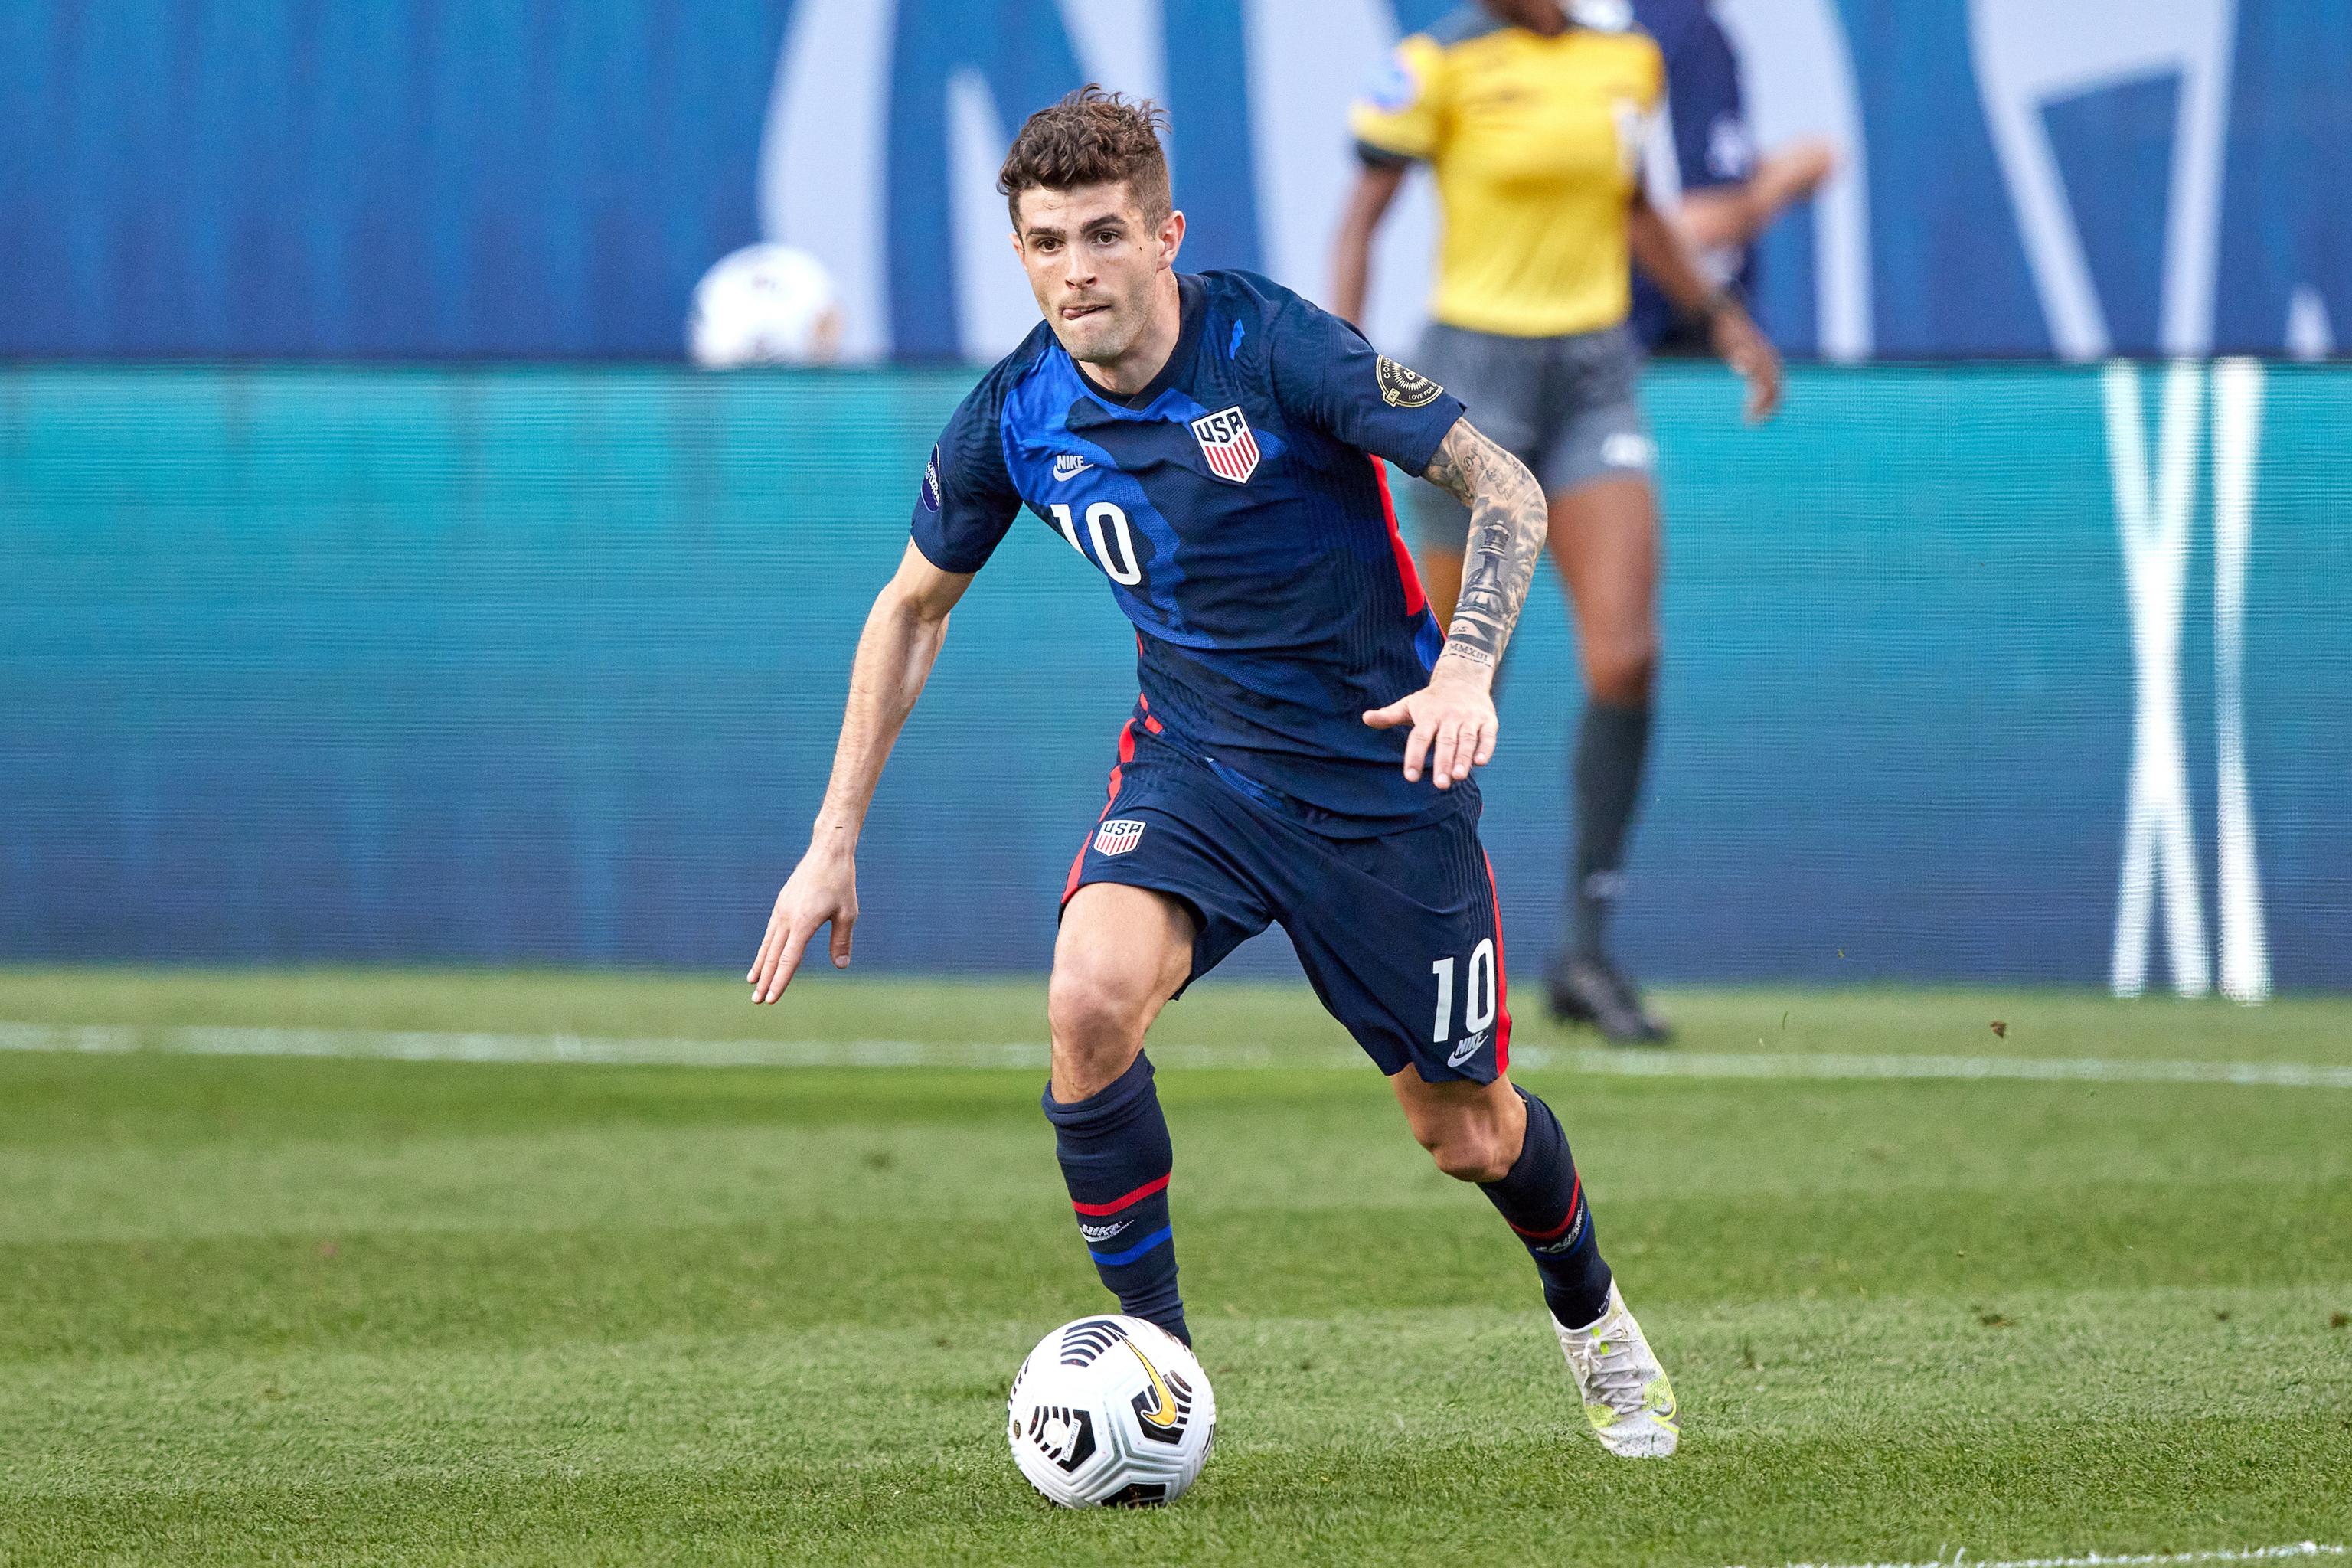 Usmnt Vs Mexico 2021 Nations League Final Odds Live Stream Schedule Bleacher Report Latest News Videos And Highlights